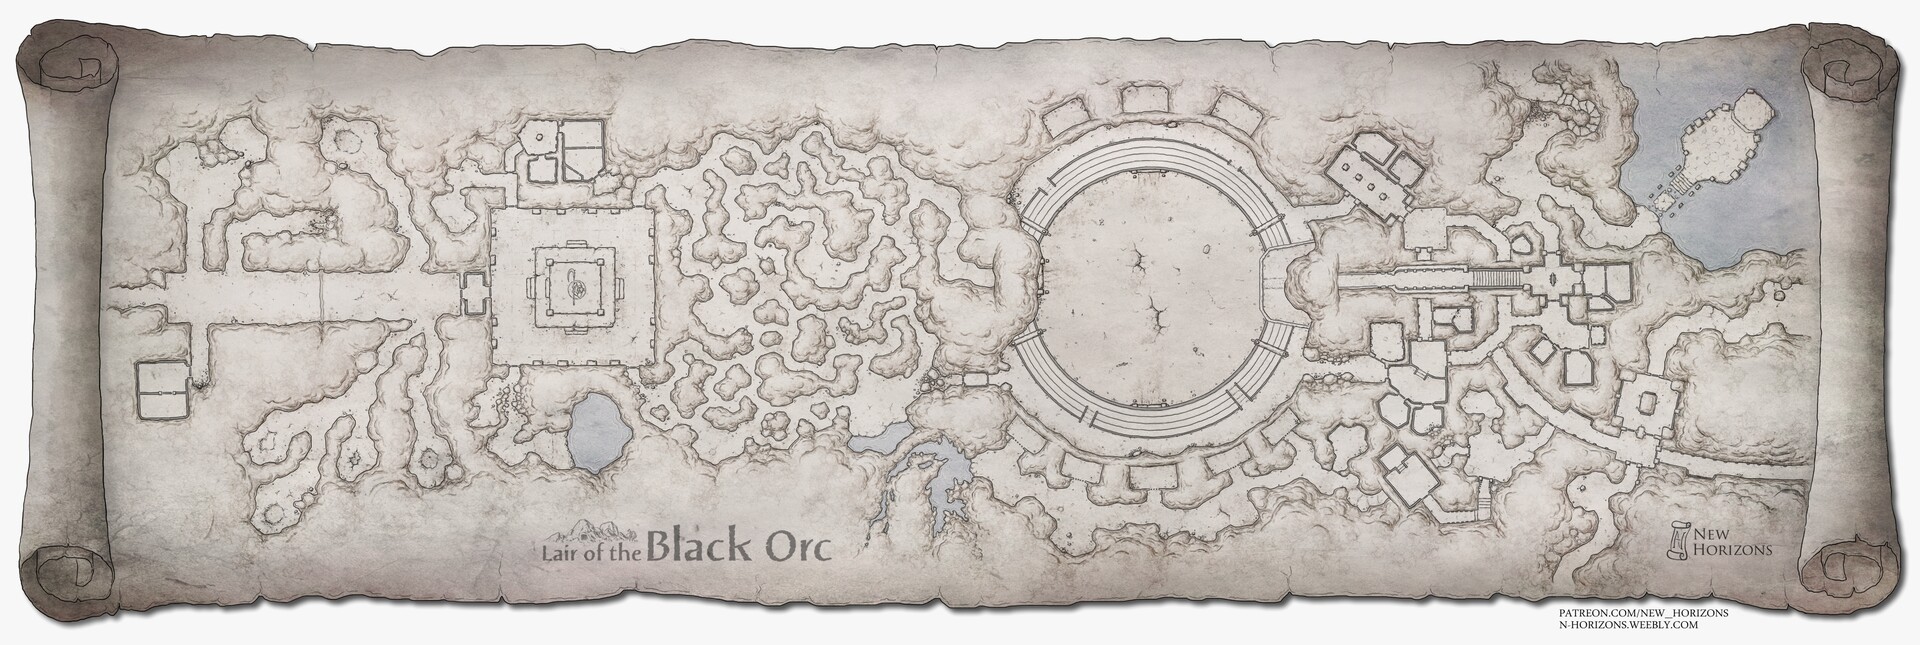 Lair of the Black Orc.